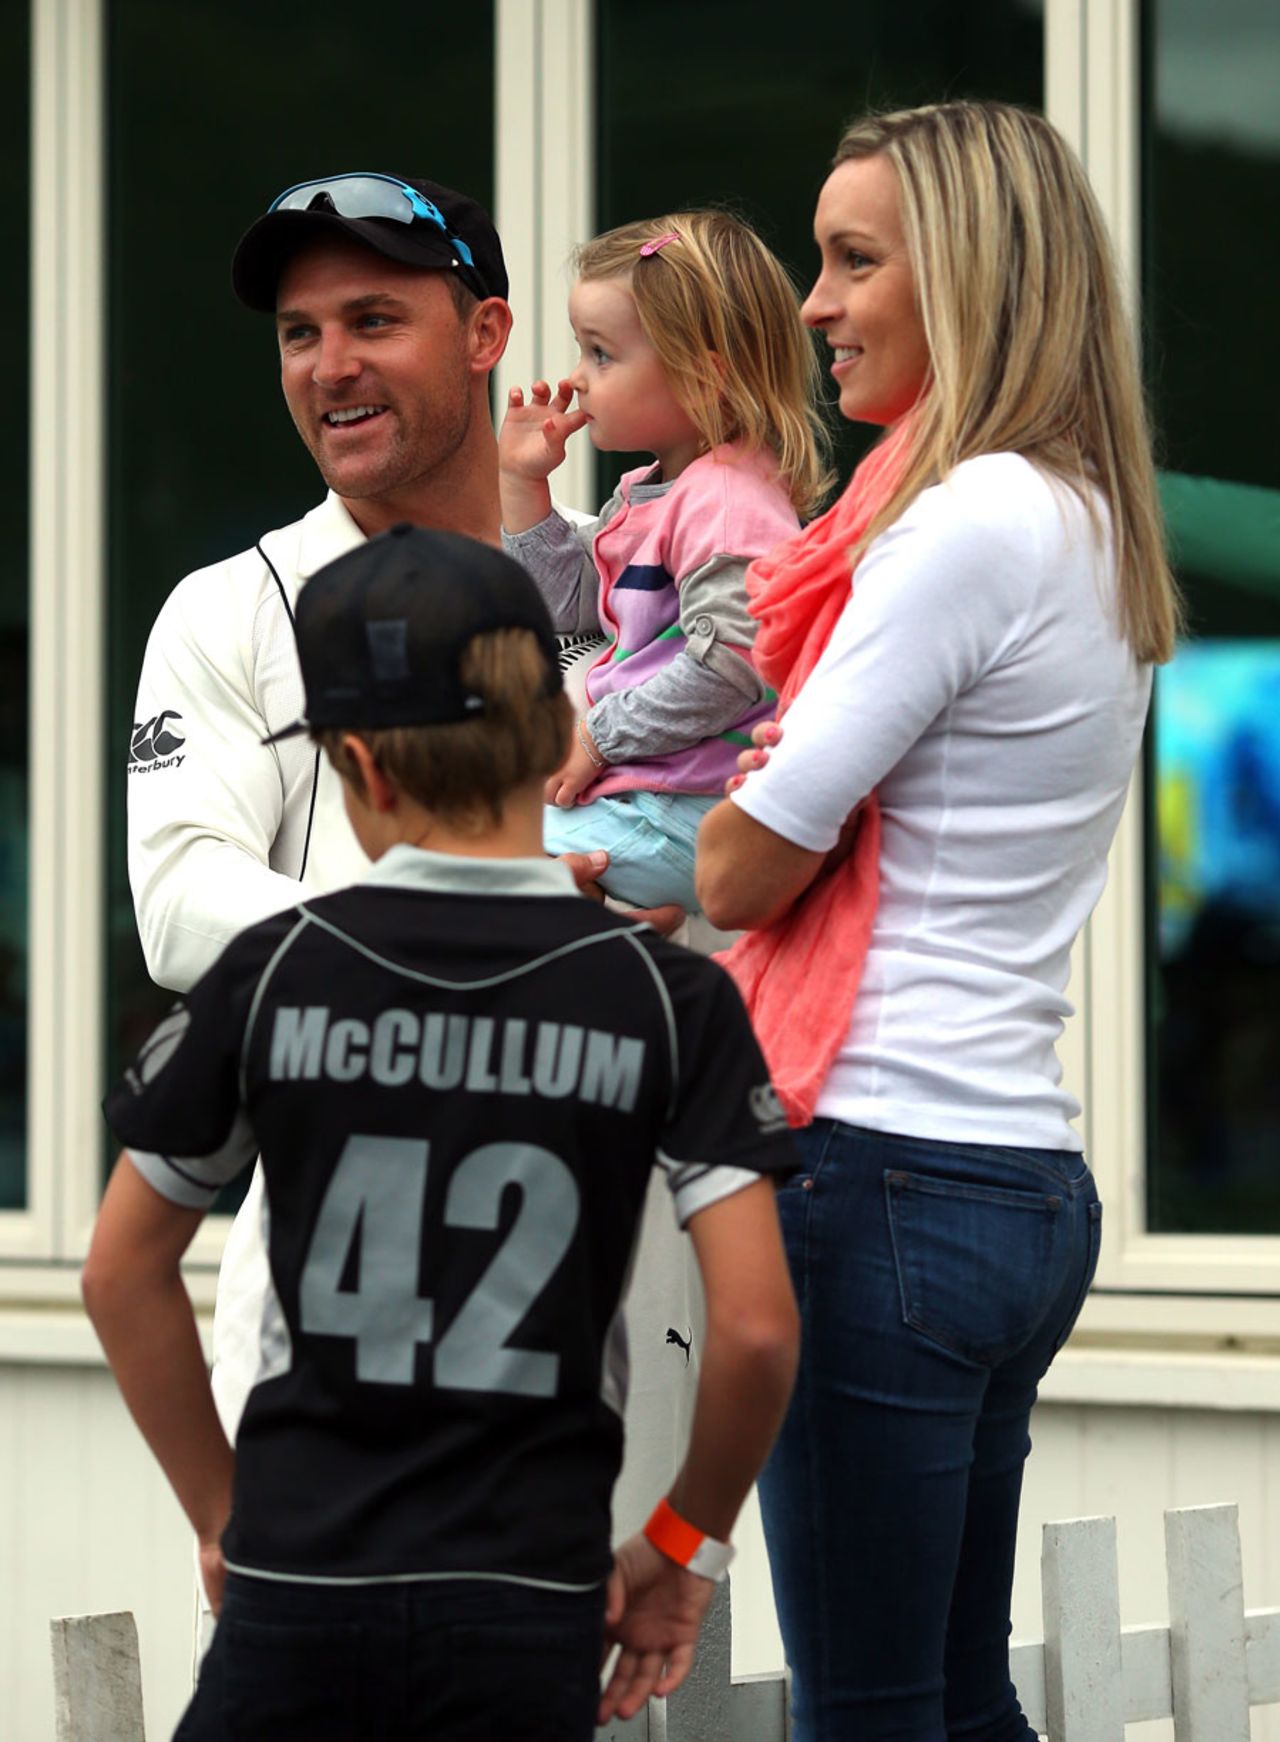 The McCullum family enjoy a moment together, New Zealand v England, 1st Test, Dunedin, 1st day, March, 6, 2013